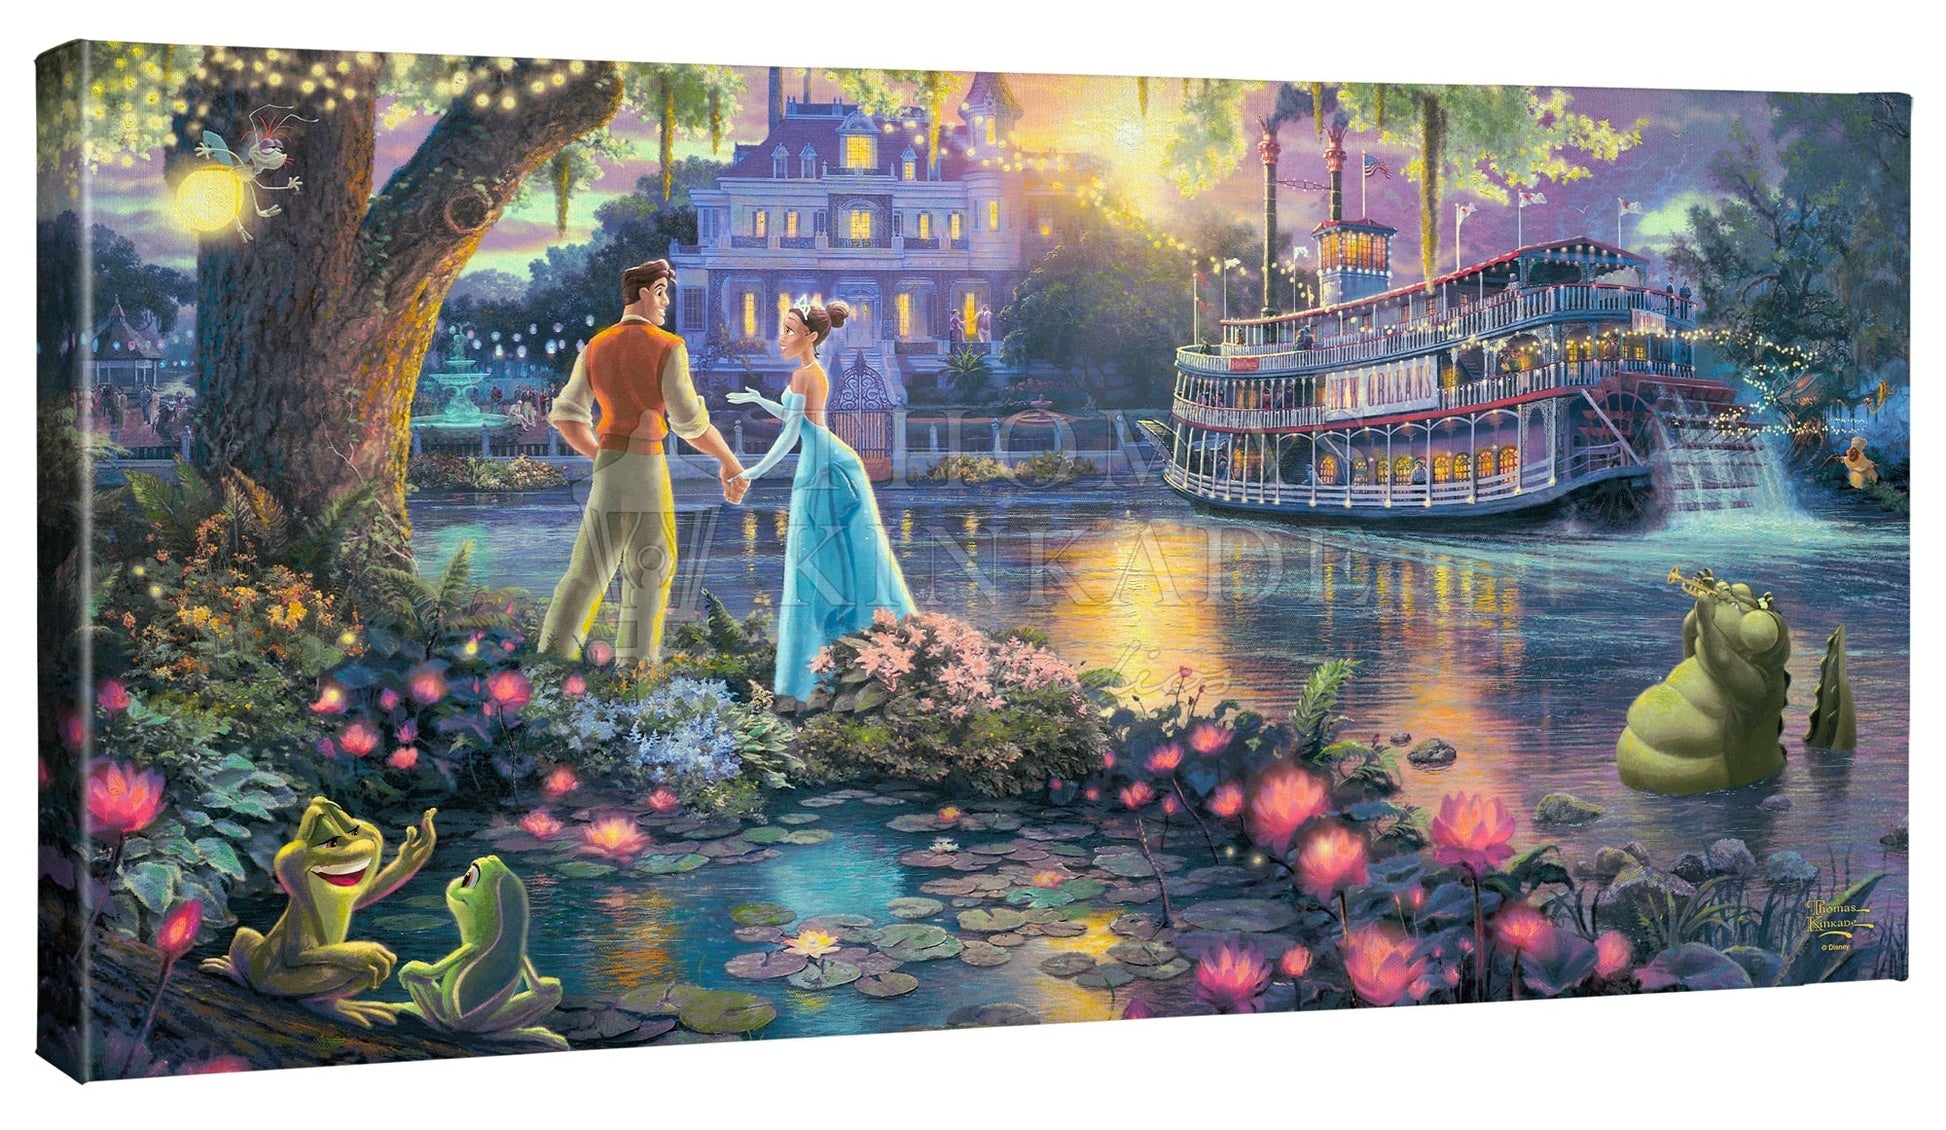 Tiana and the Prince stand by the bayou river edge holding hands under the oak tree, as the two frogs (Tiana and the Prince) watch.|